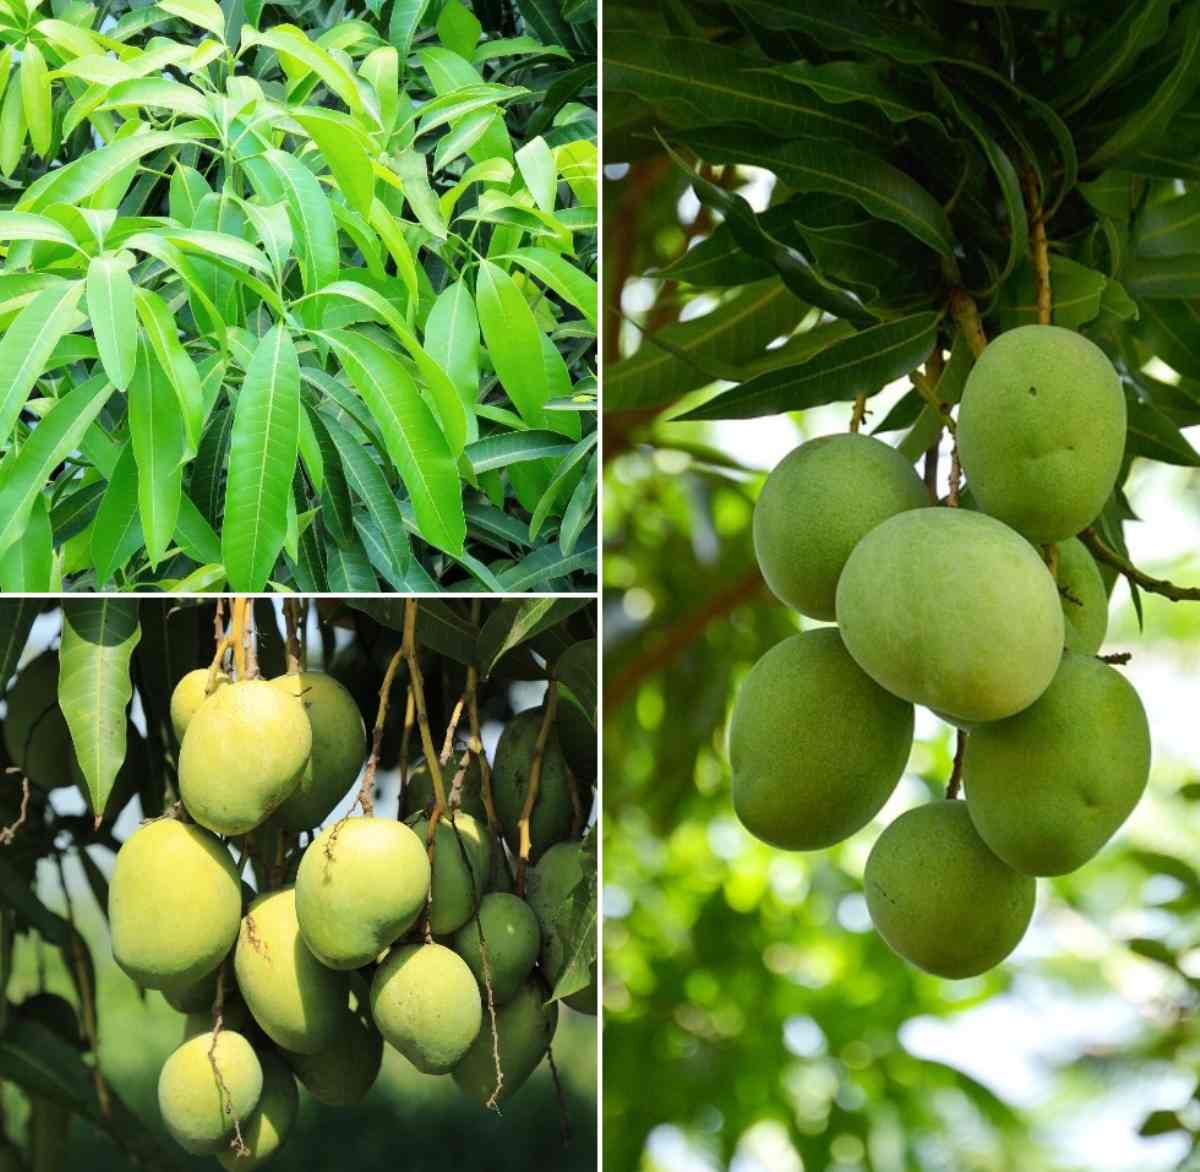 Questions about Mango cultivation.